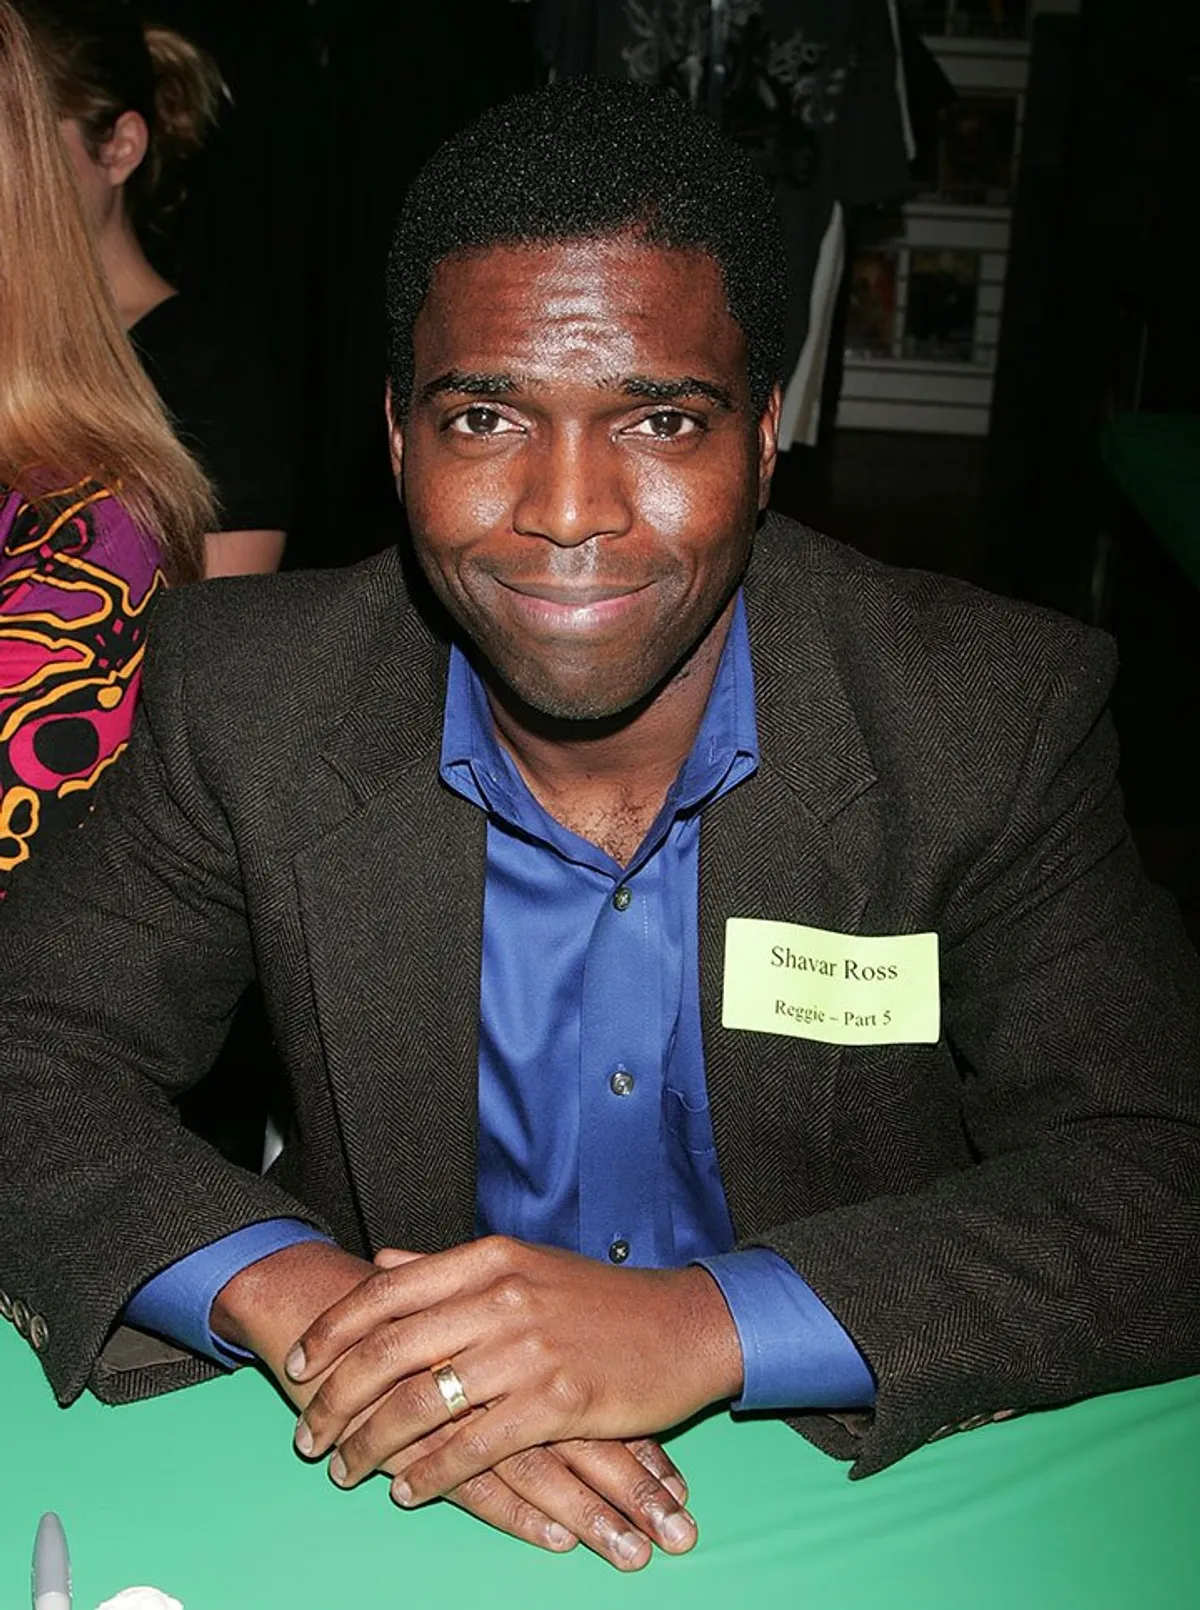 Shavar Ross attends Anchor Bay Entertainment's Jason Voorhees reunion at Emerald Knights comics and games store on February 3, 2009 in Burbank, California. | Photo: Getty Images